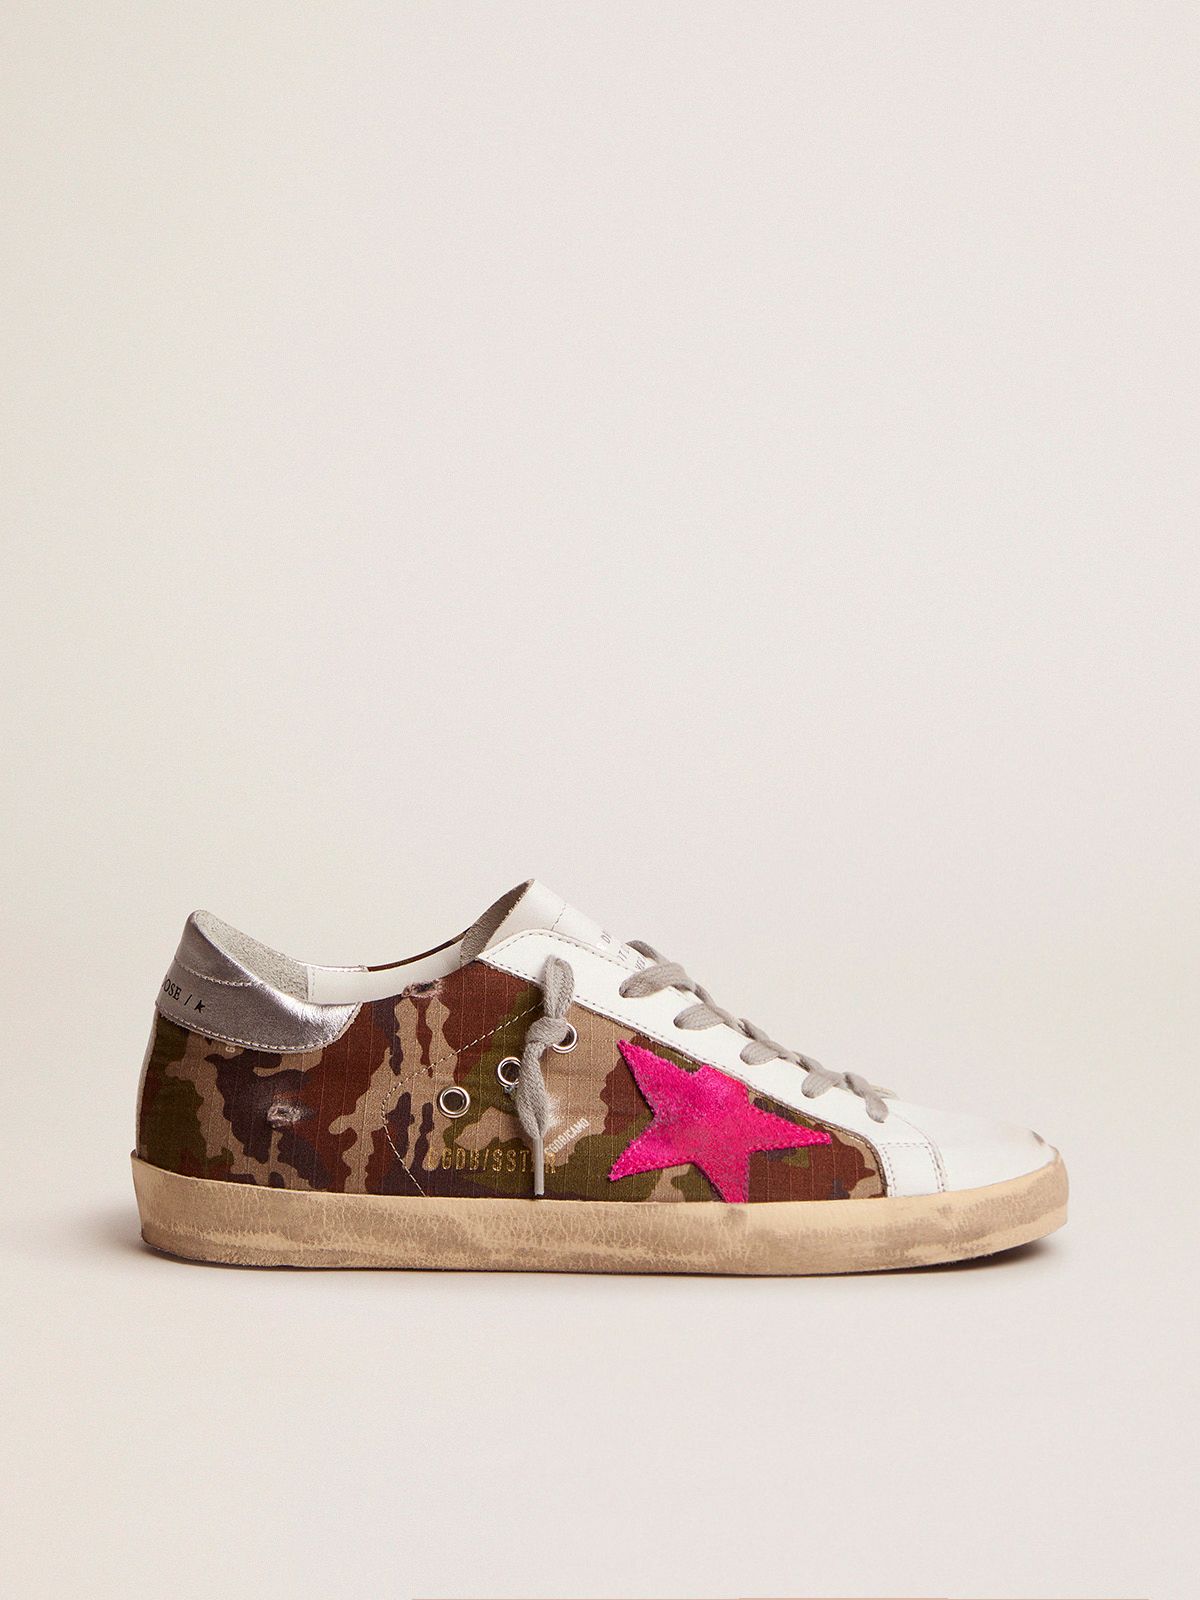 Sneakers Uomo Golden Goose Super-Star sneakers with camouflage pattern and fuchsia star